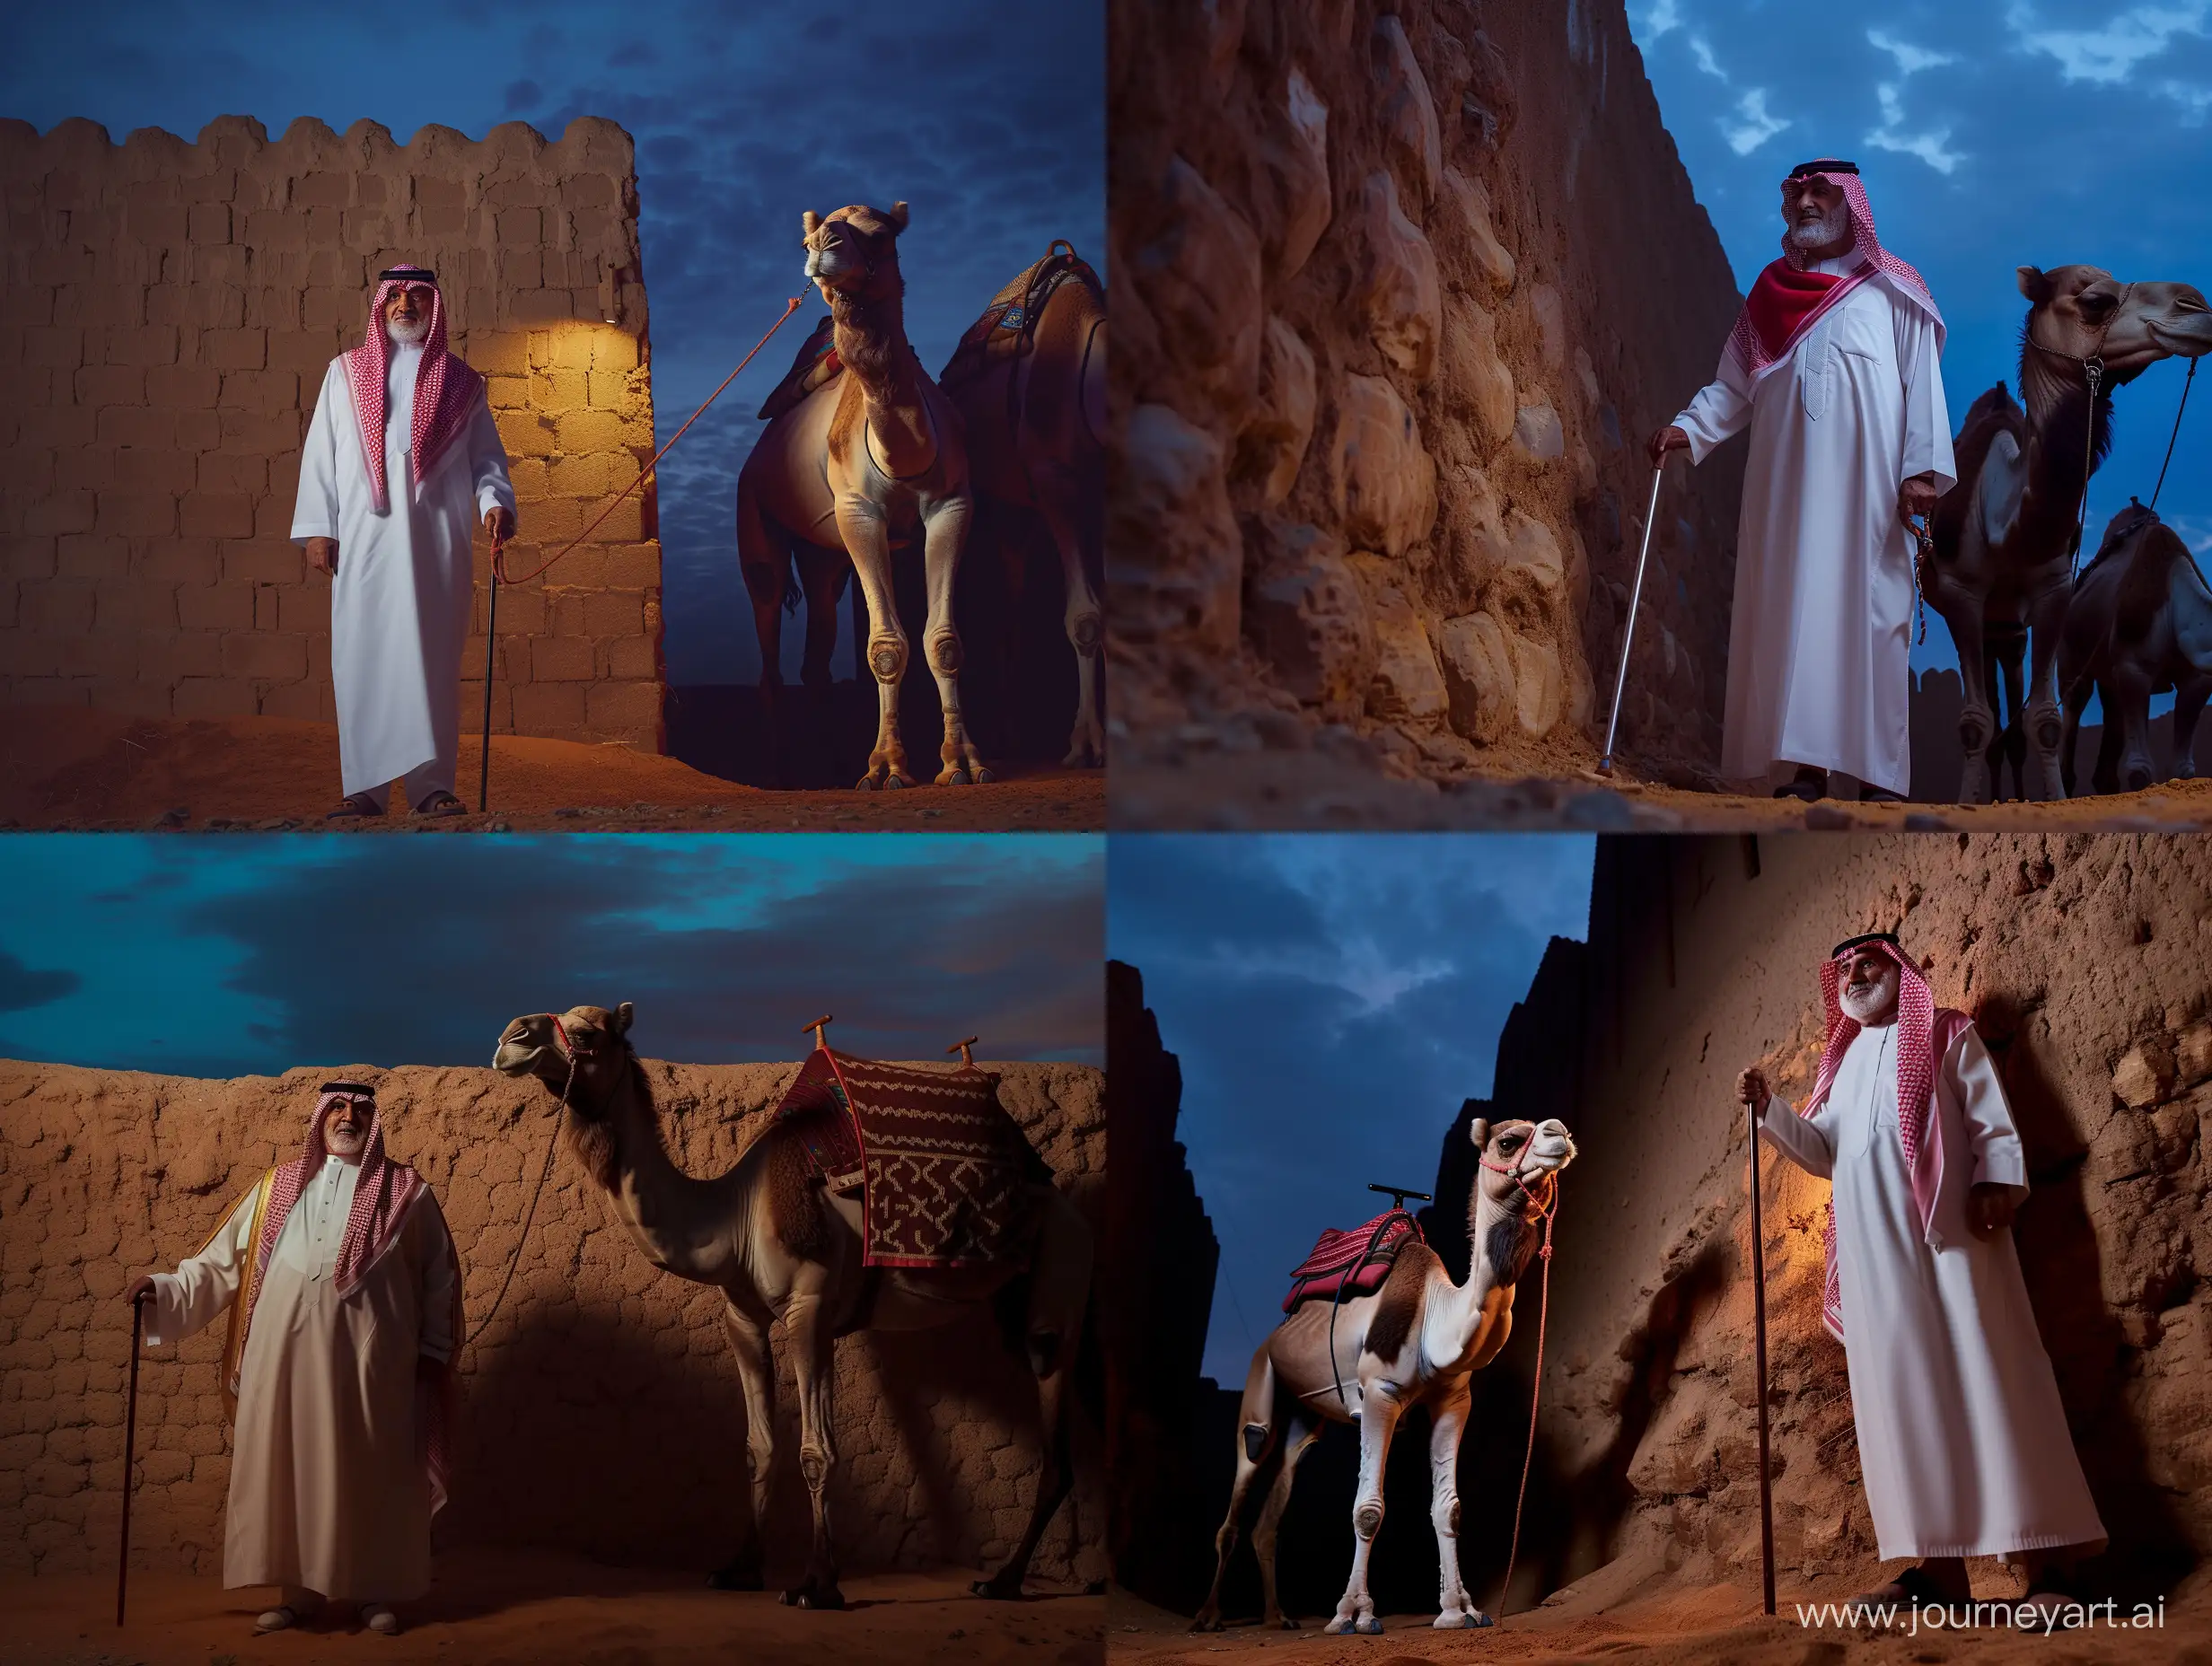 Confident-Saudi-Prince-with-Camel-in-Dramatic-Night-Setting